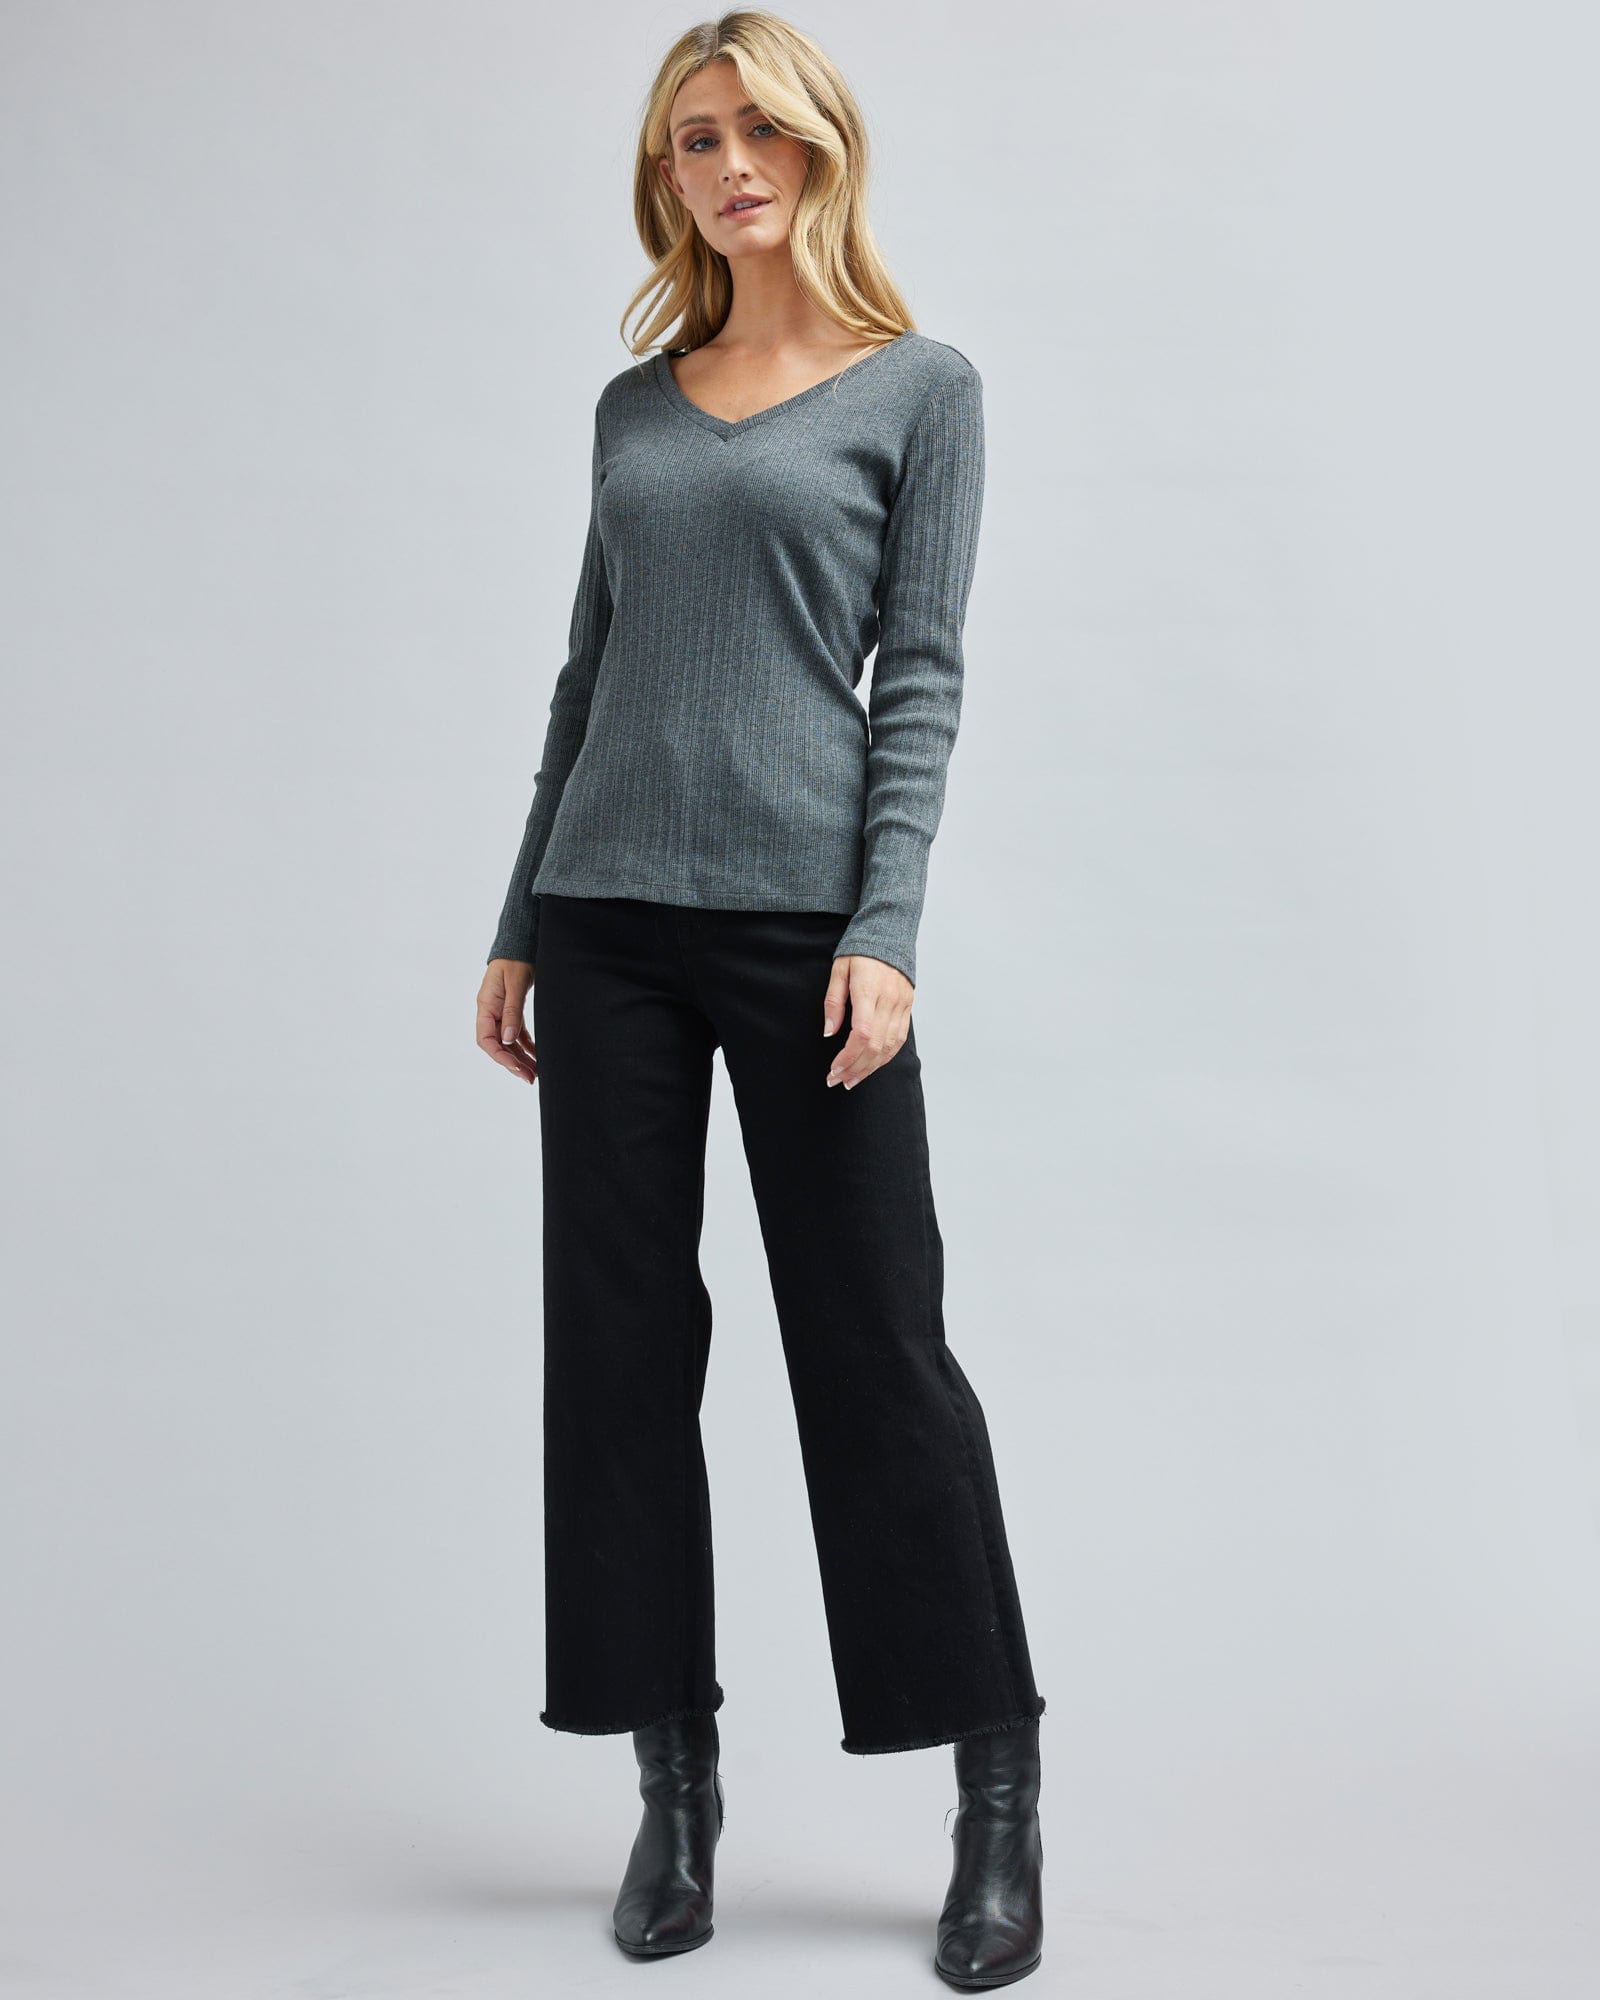 Woman in a long sleeve, ribbed, gray, t-shirt